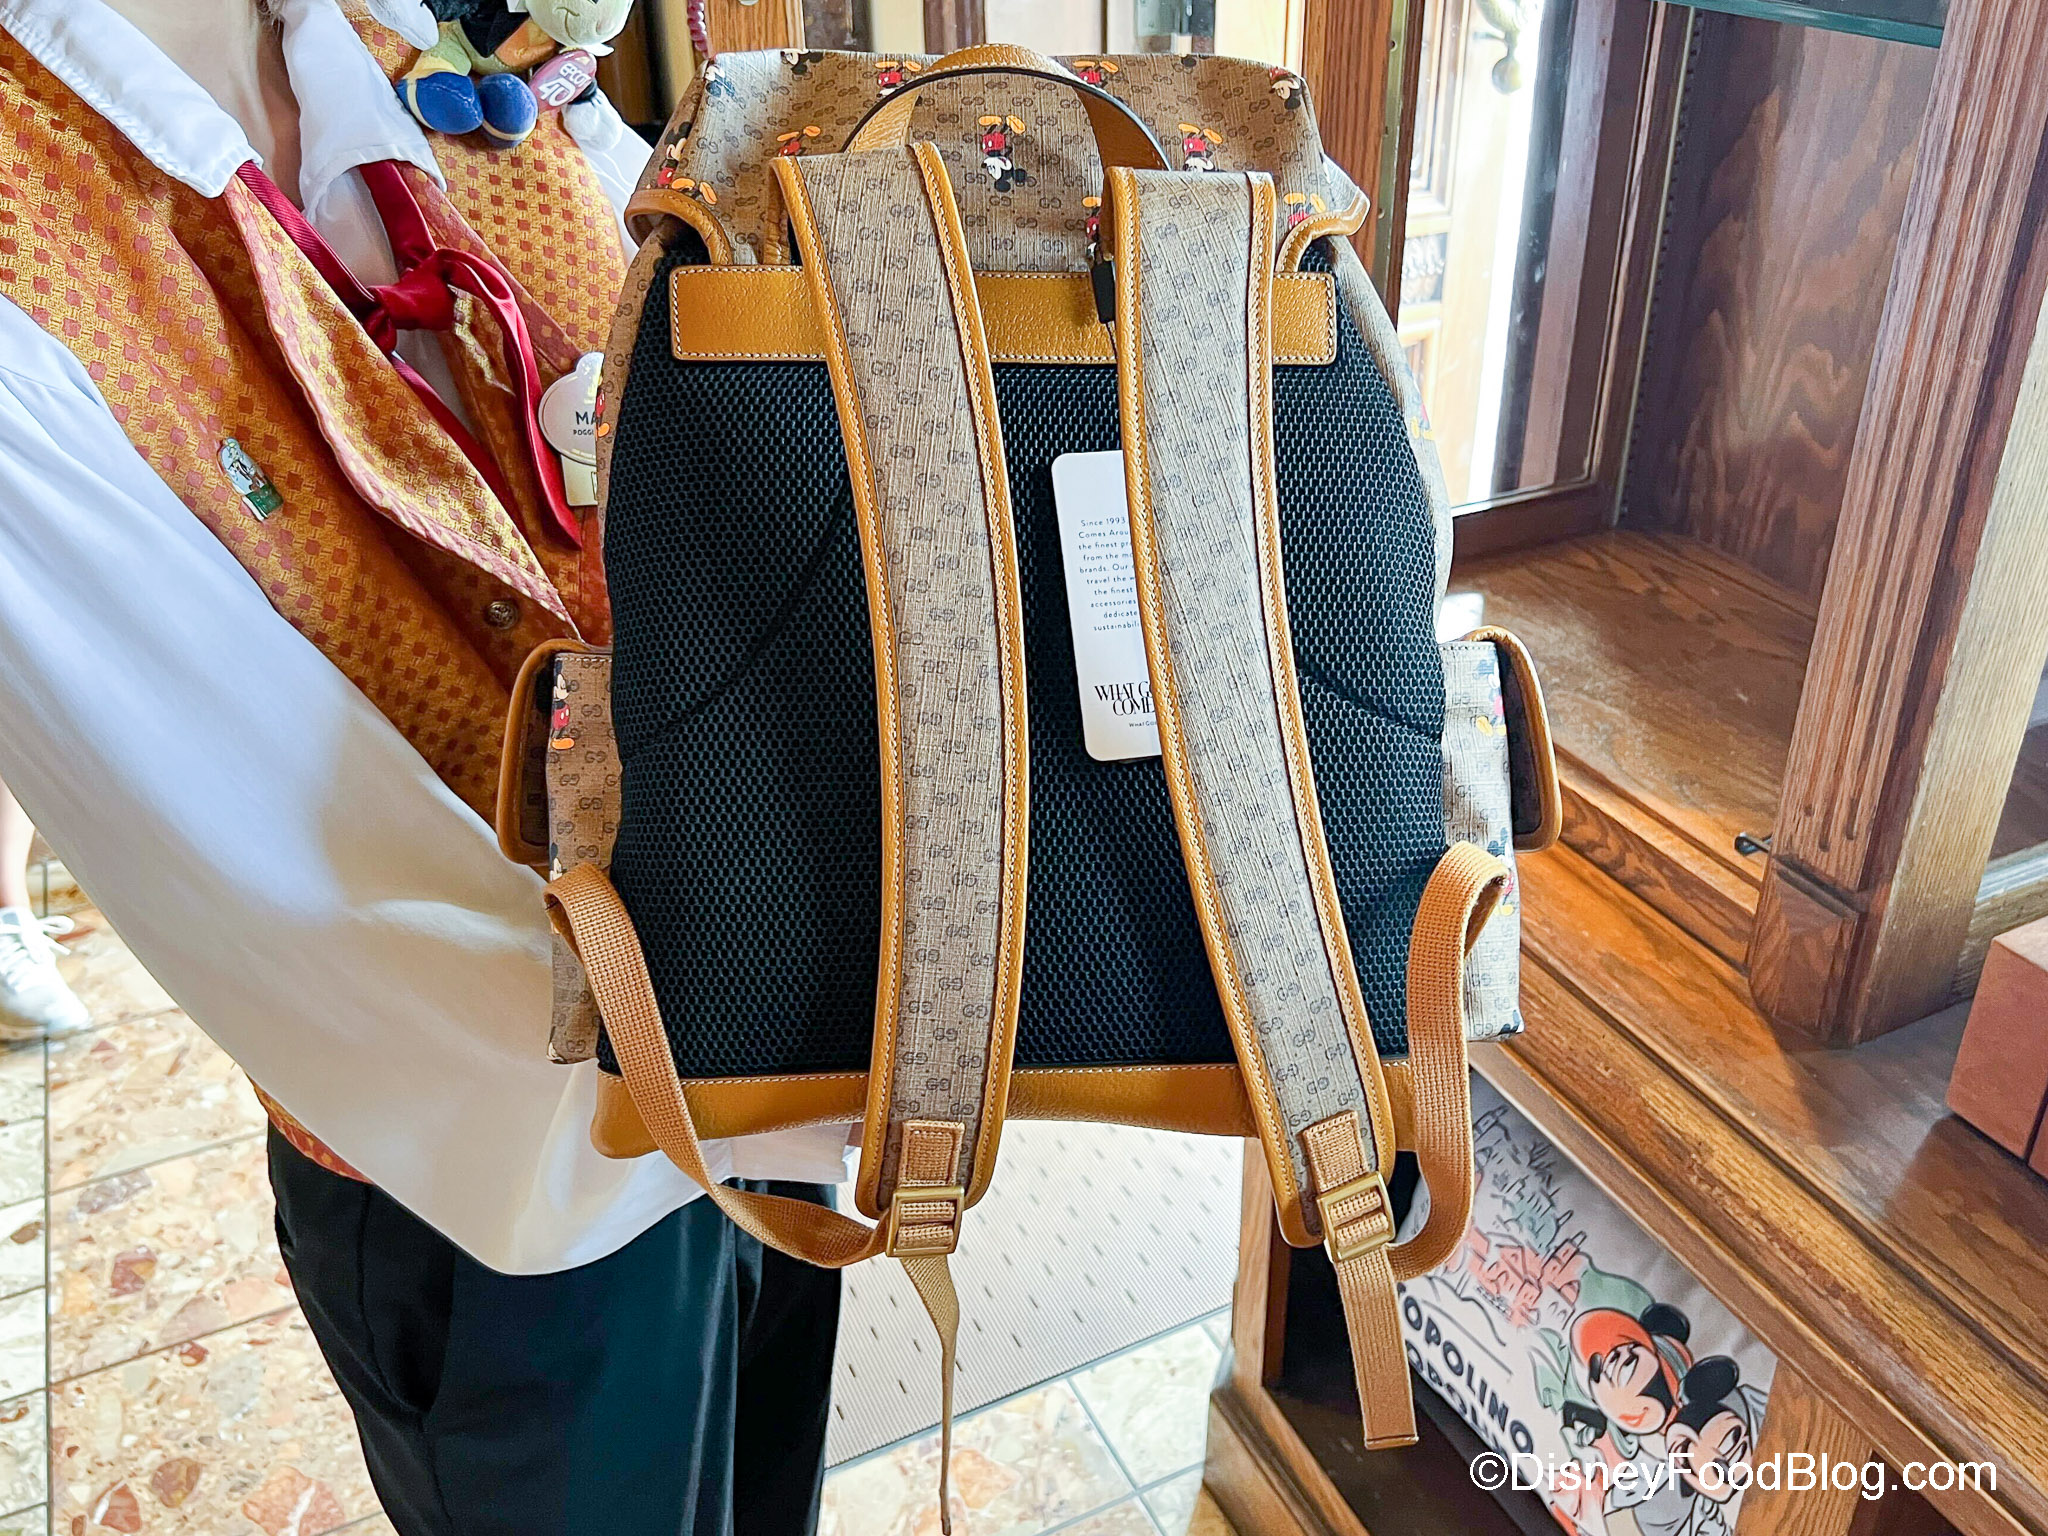 The RARE Gucci Bags You Can Find in An UNEXPECTED Disney World Spot